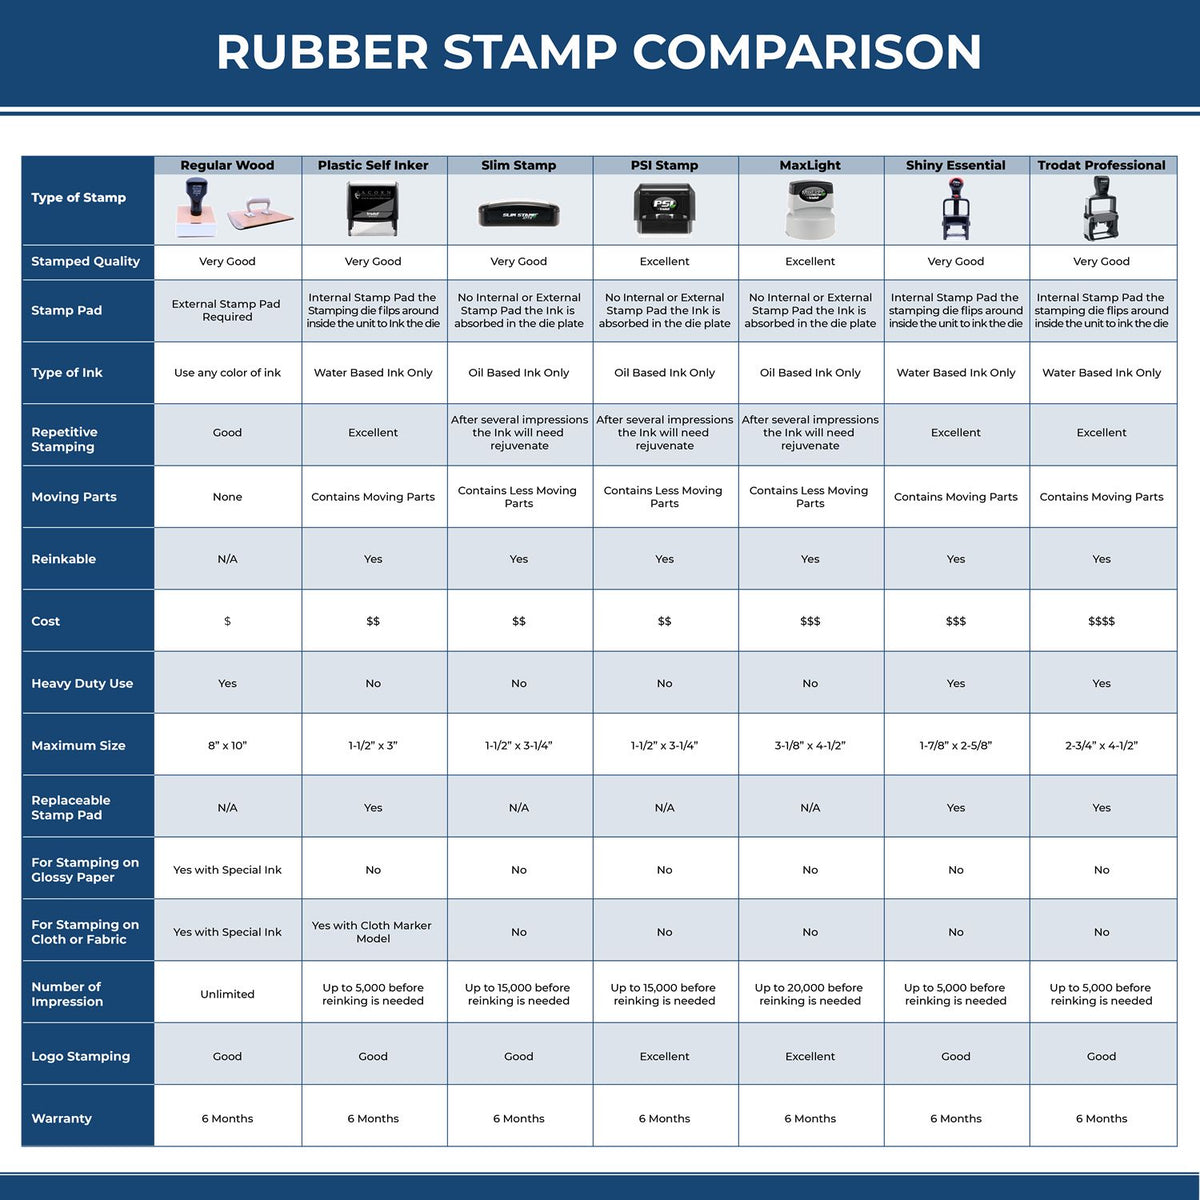 A comparison chart for the different types of mount models available for the Wooden Handle Arizona State Seal Notary Public Stamp.